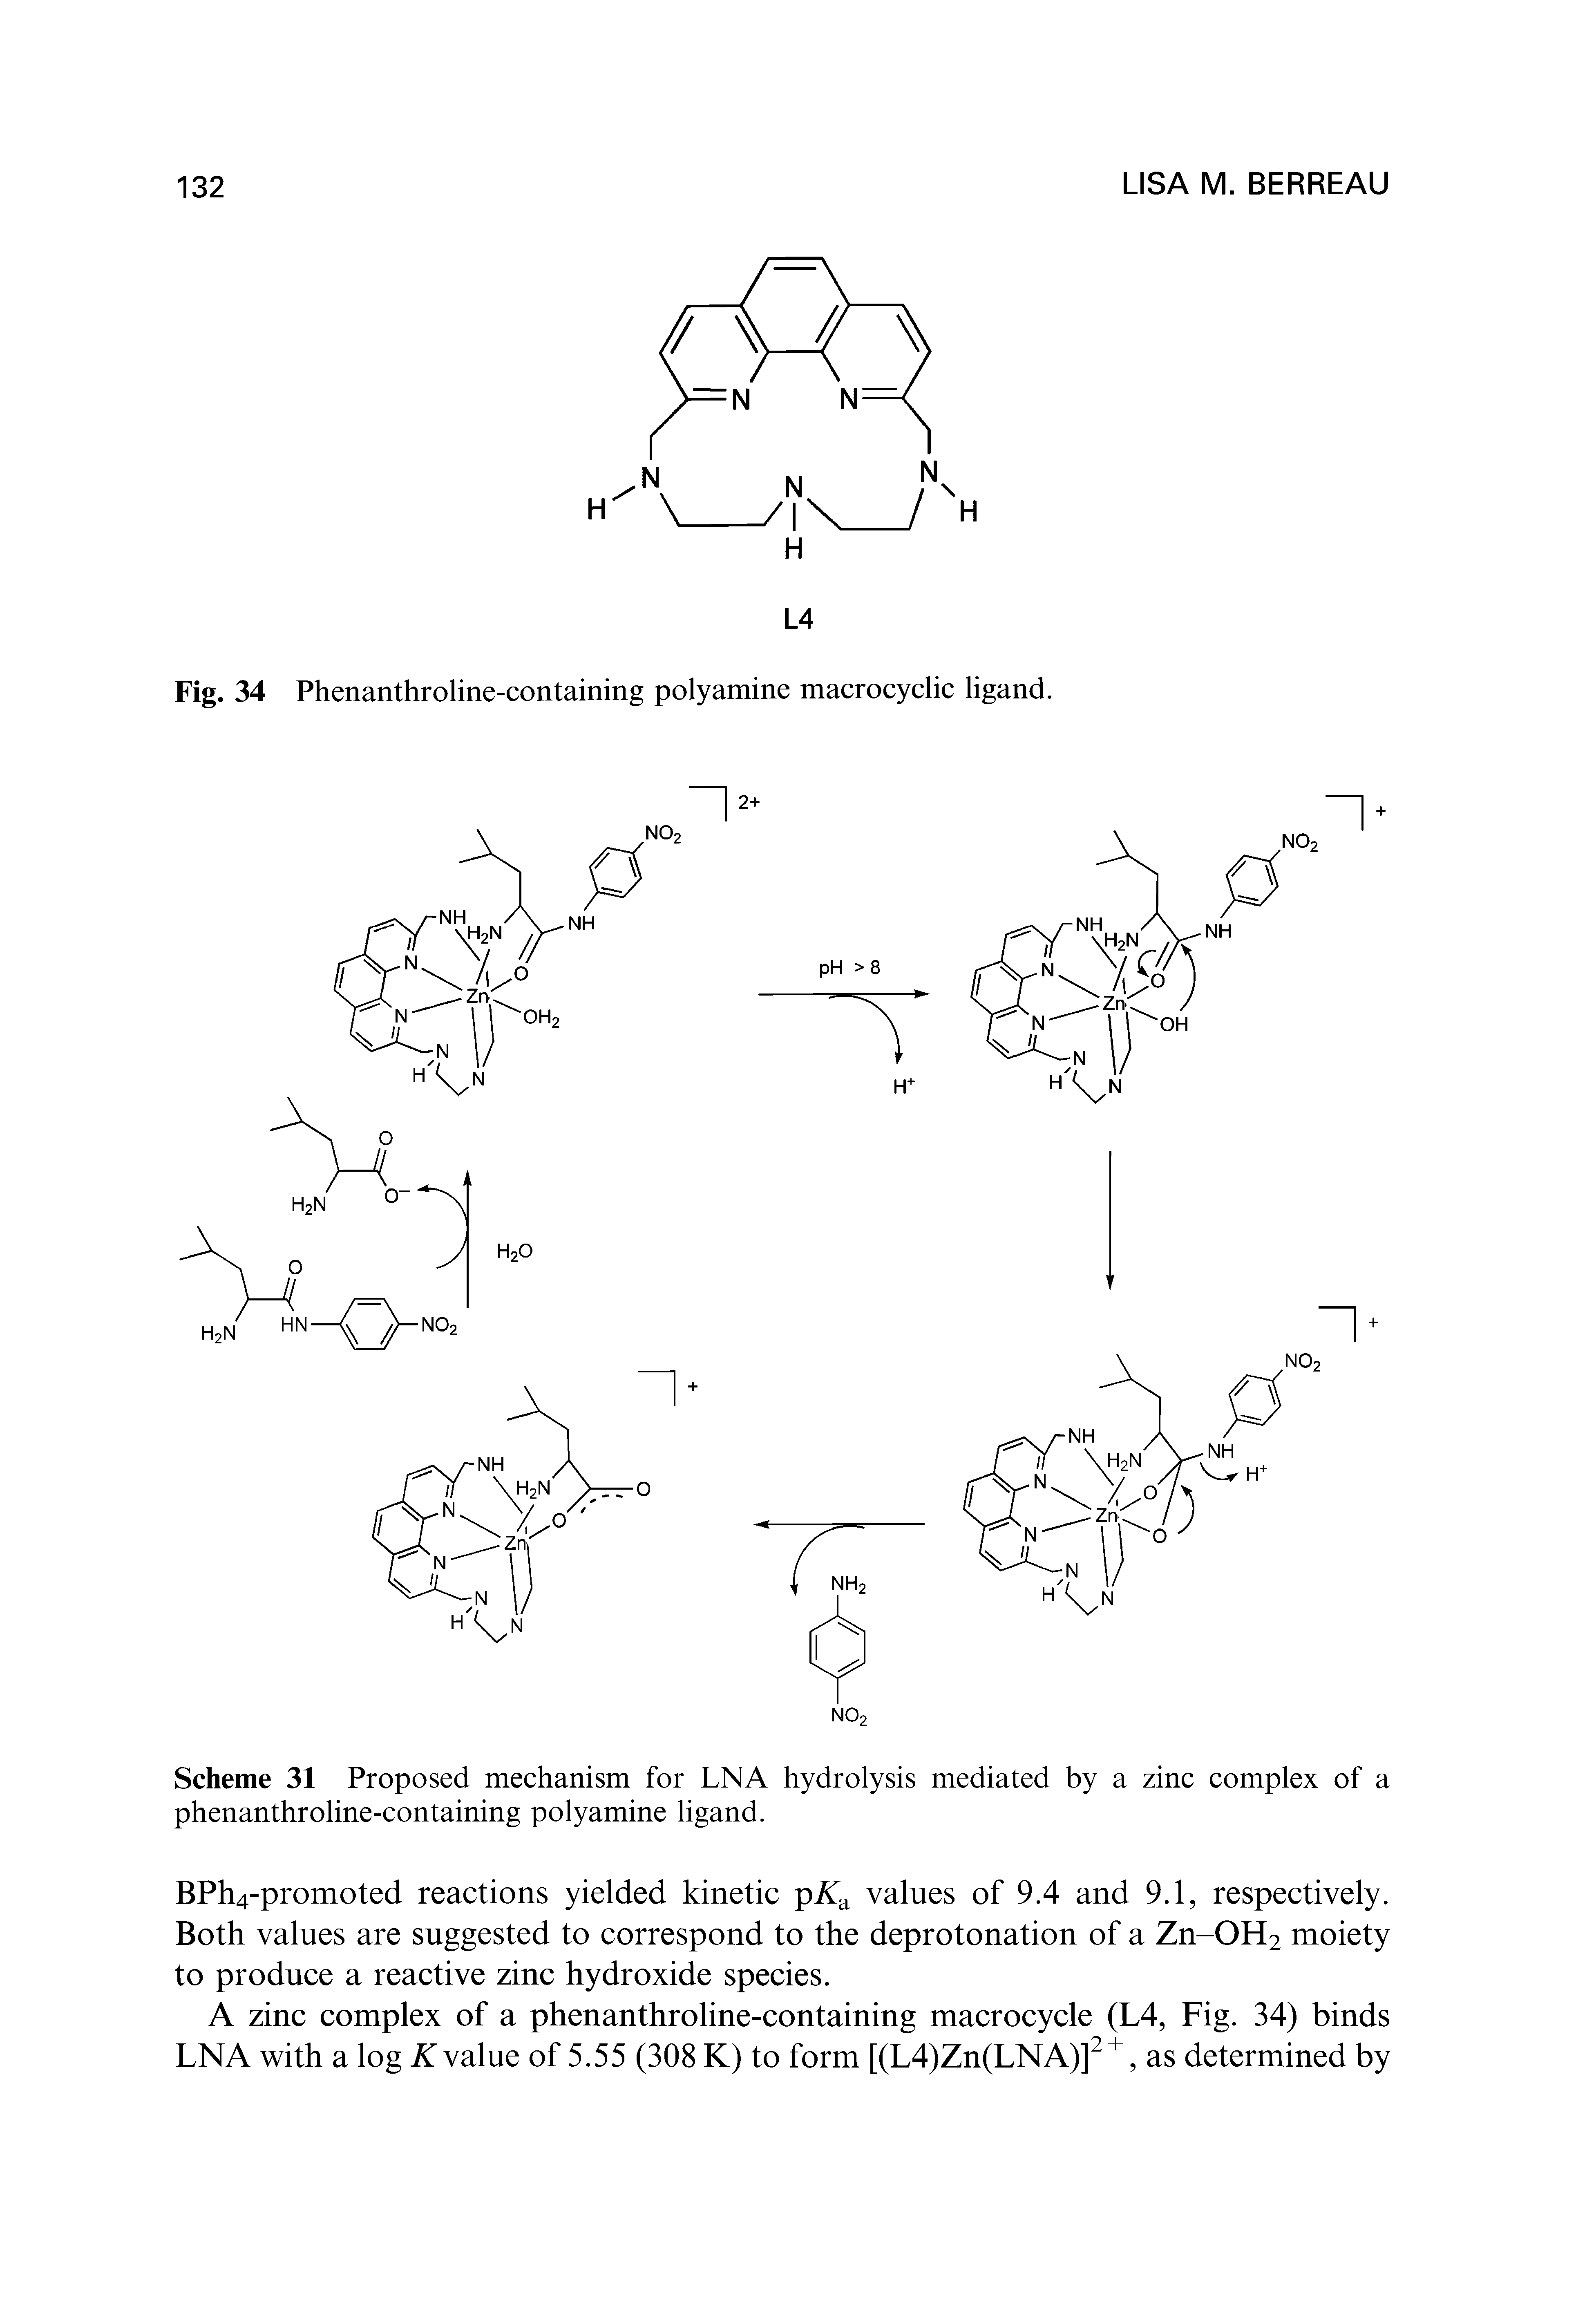 Scheme 31 Proposed mechanism for LNA hydrolysis mediated by a zinc complex of a phenanthroline-containing polyamine ligand.